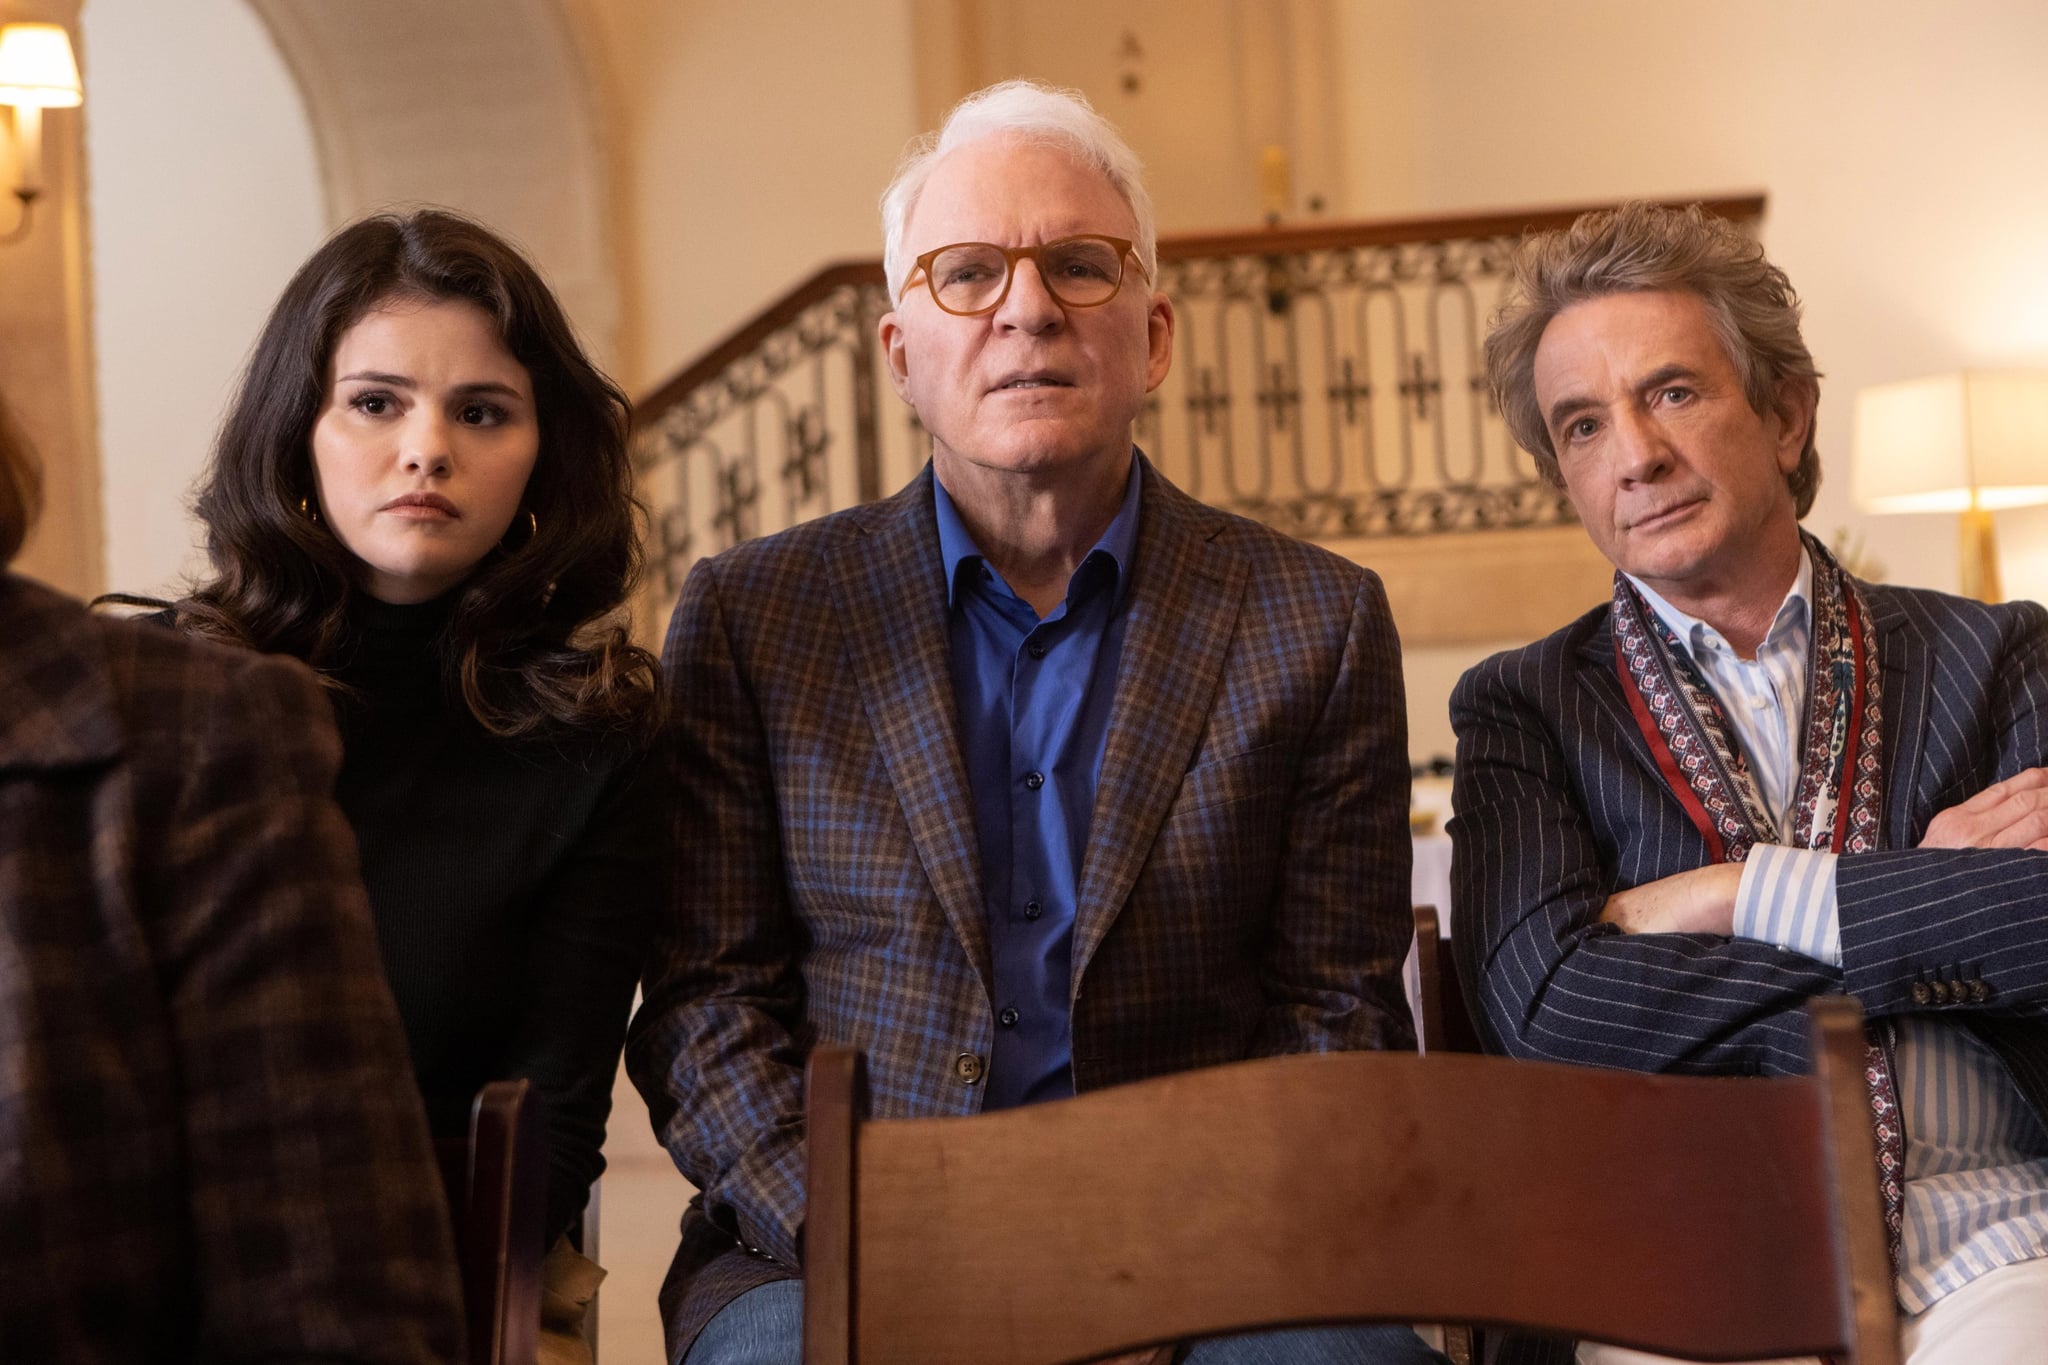 ONLY MURDERS IN THE BUILDING, from left: Selena Gomez, Steve Martin, Martin Short, Who is Tim Kono?', (Season 1, ep. 102, aired Aug. 31, 2021). photo: Craig Blankenhorn / Hulu / Courtesy Everett Collection